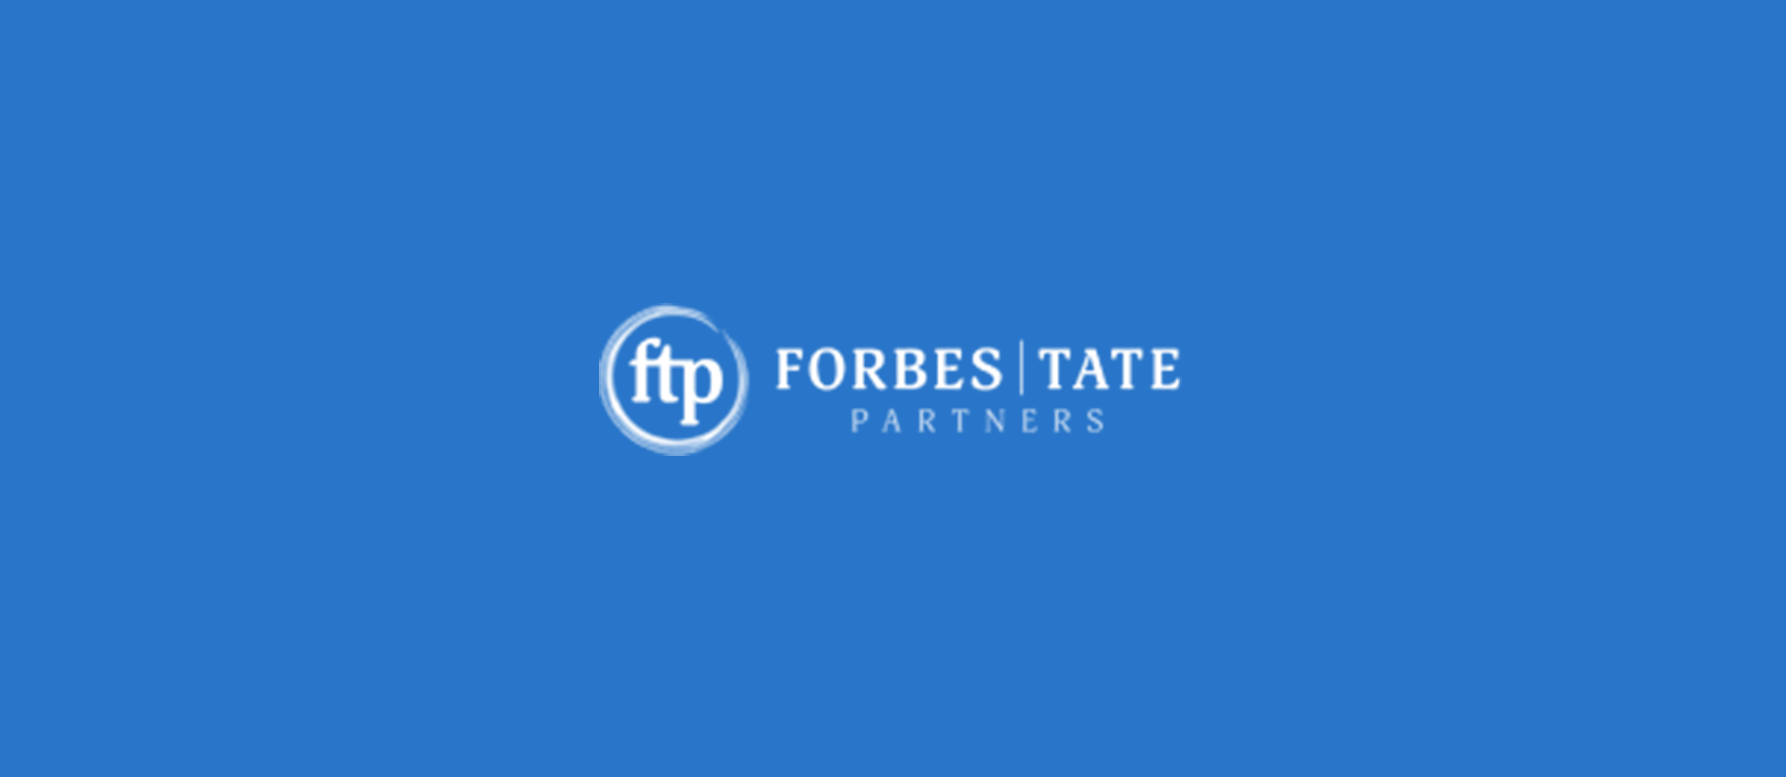 RELEASE: Leading Democratic Strategist Cindy Brown Joins Forbes Tate Partners